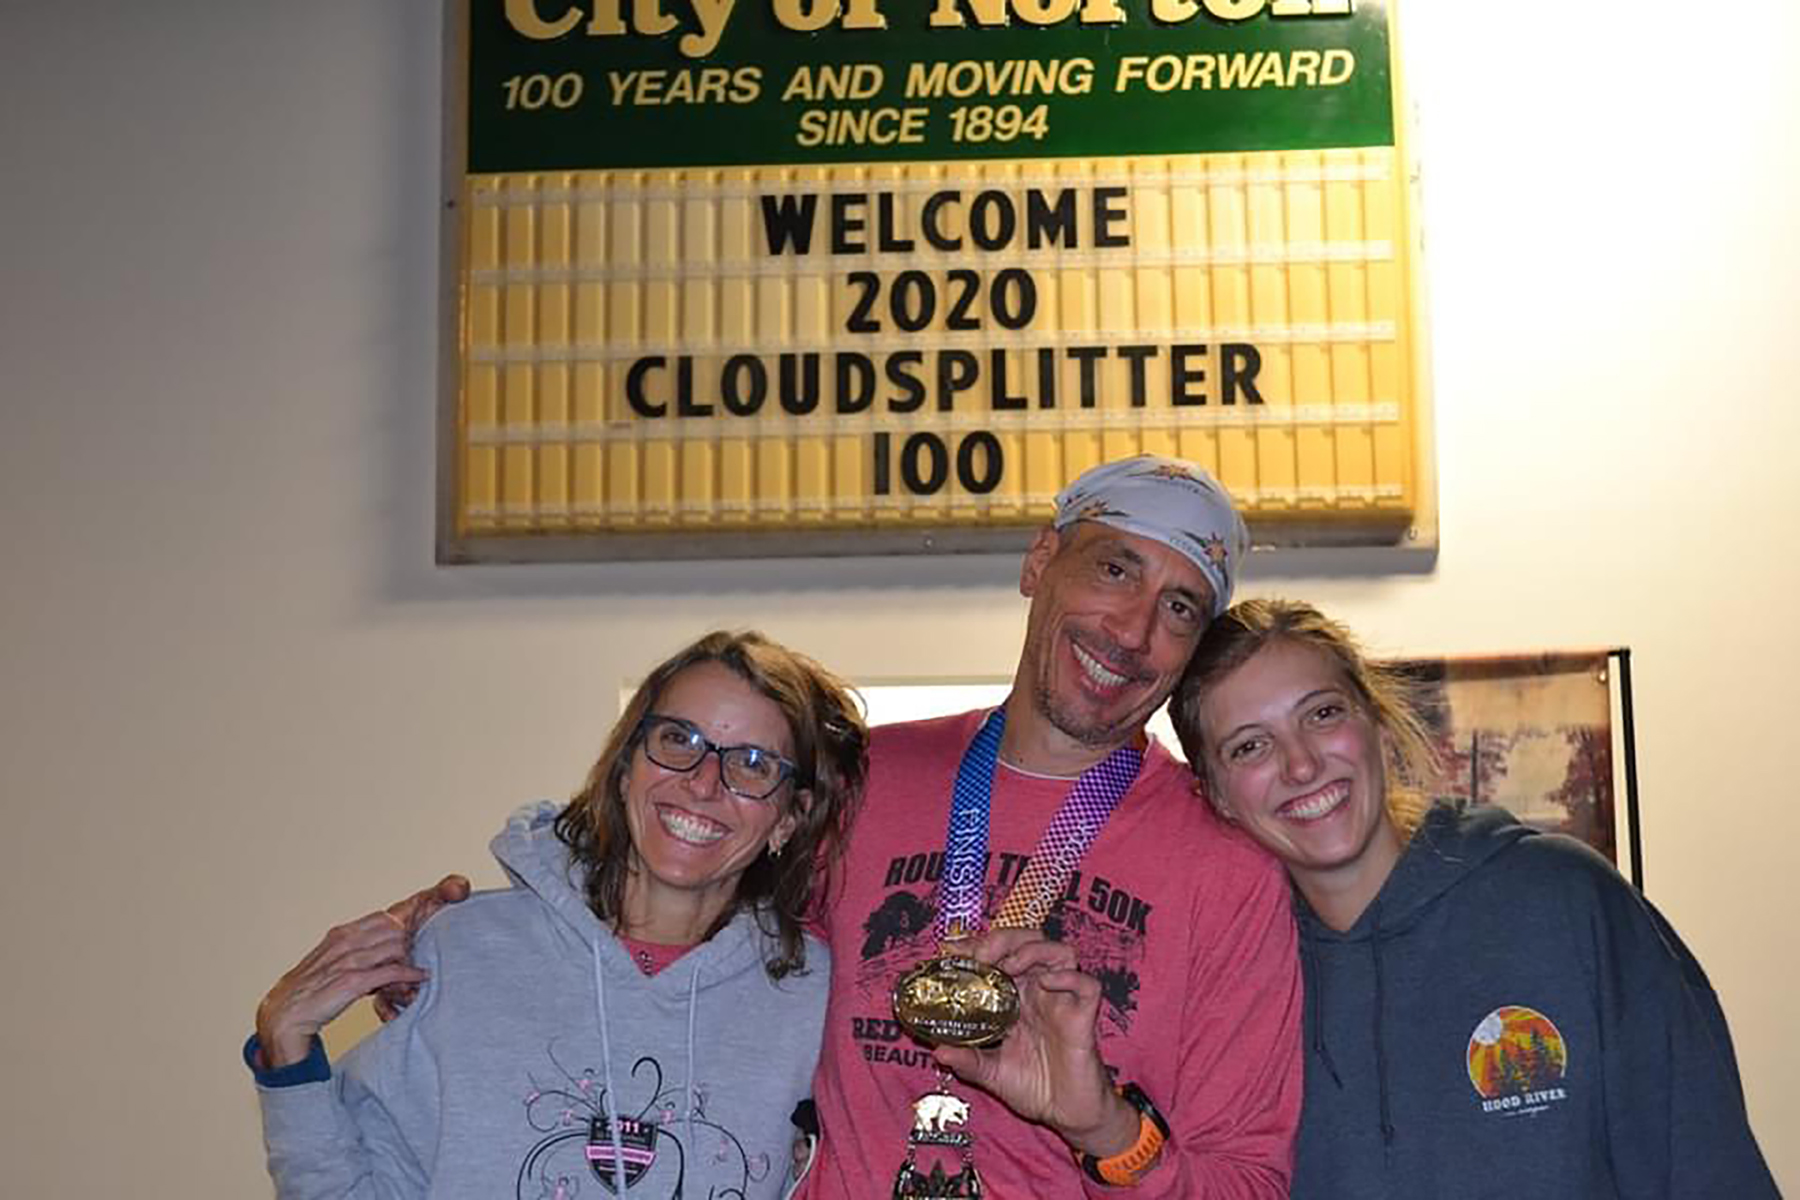 Randy Kreill called the Cloudsplitter 100 he finished in 2020 his "longest and toughest" race. Kreill ran this race in sandals, taking more than 37 hours over rugged remote mountains in Virginia. He stands  post-race with his wife Megan and daughter Lindsay.